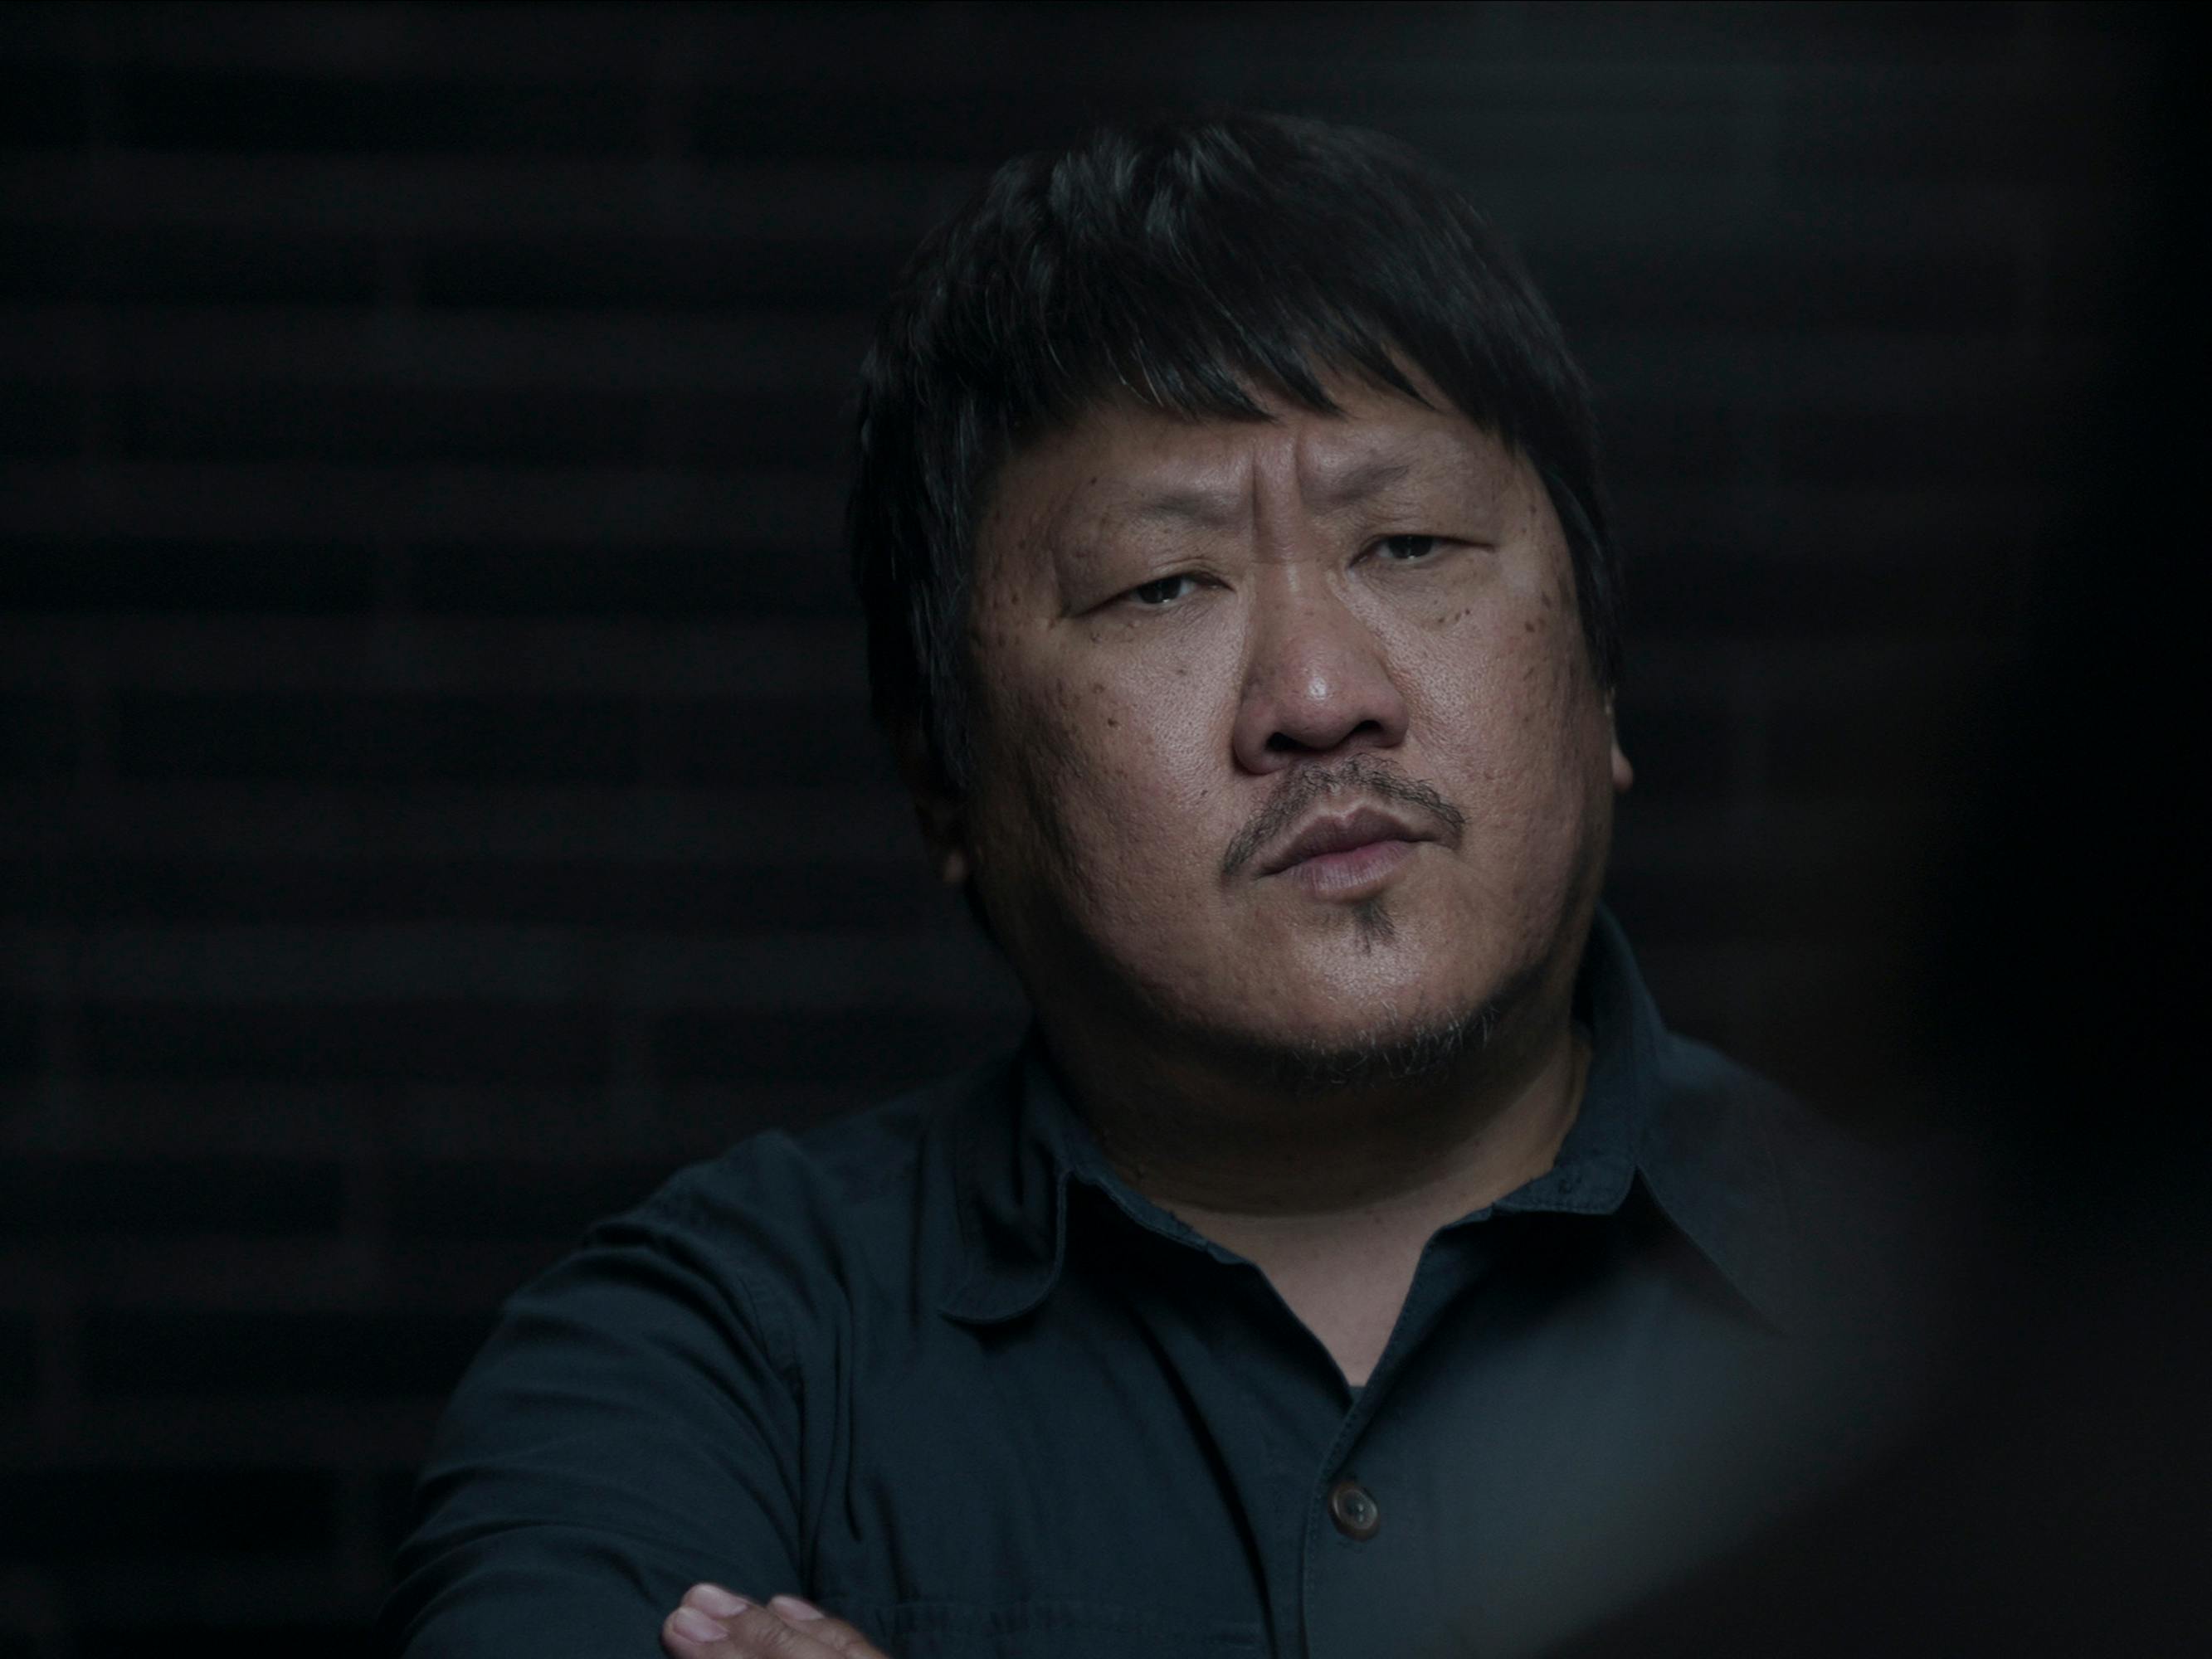 Da Shi (Benedict Wong) wears a navy shirt and crosses his arms in the dark.